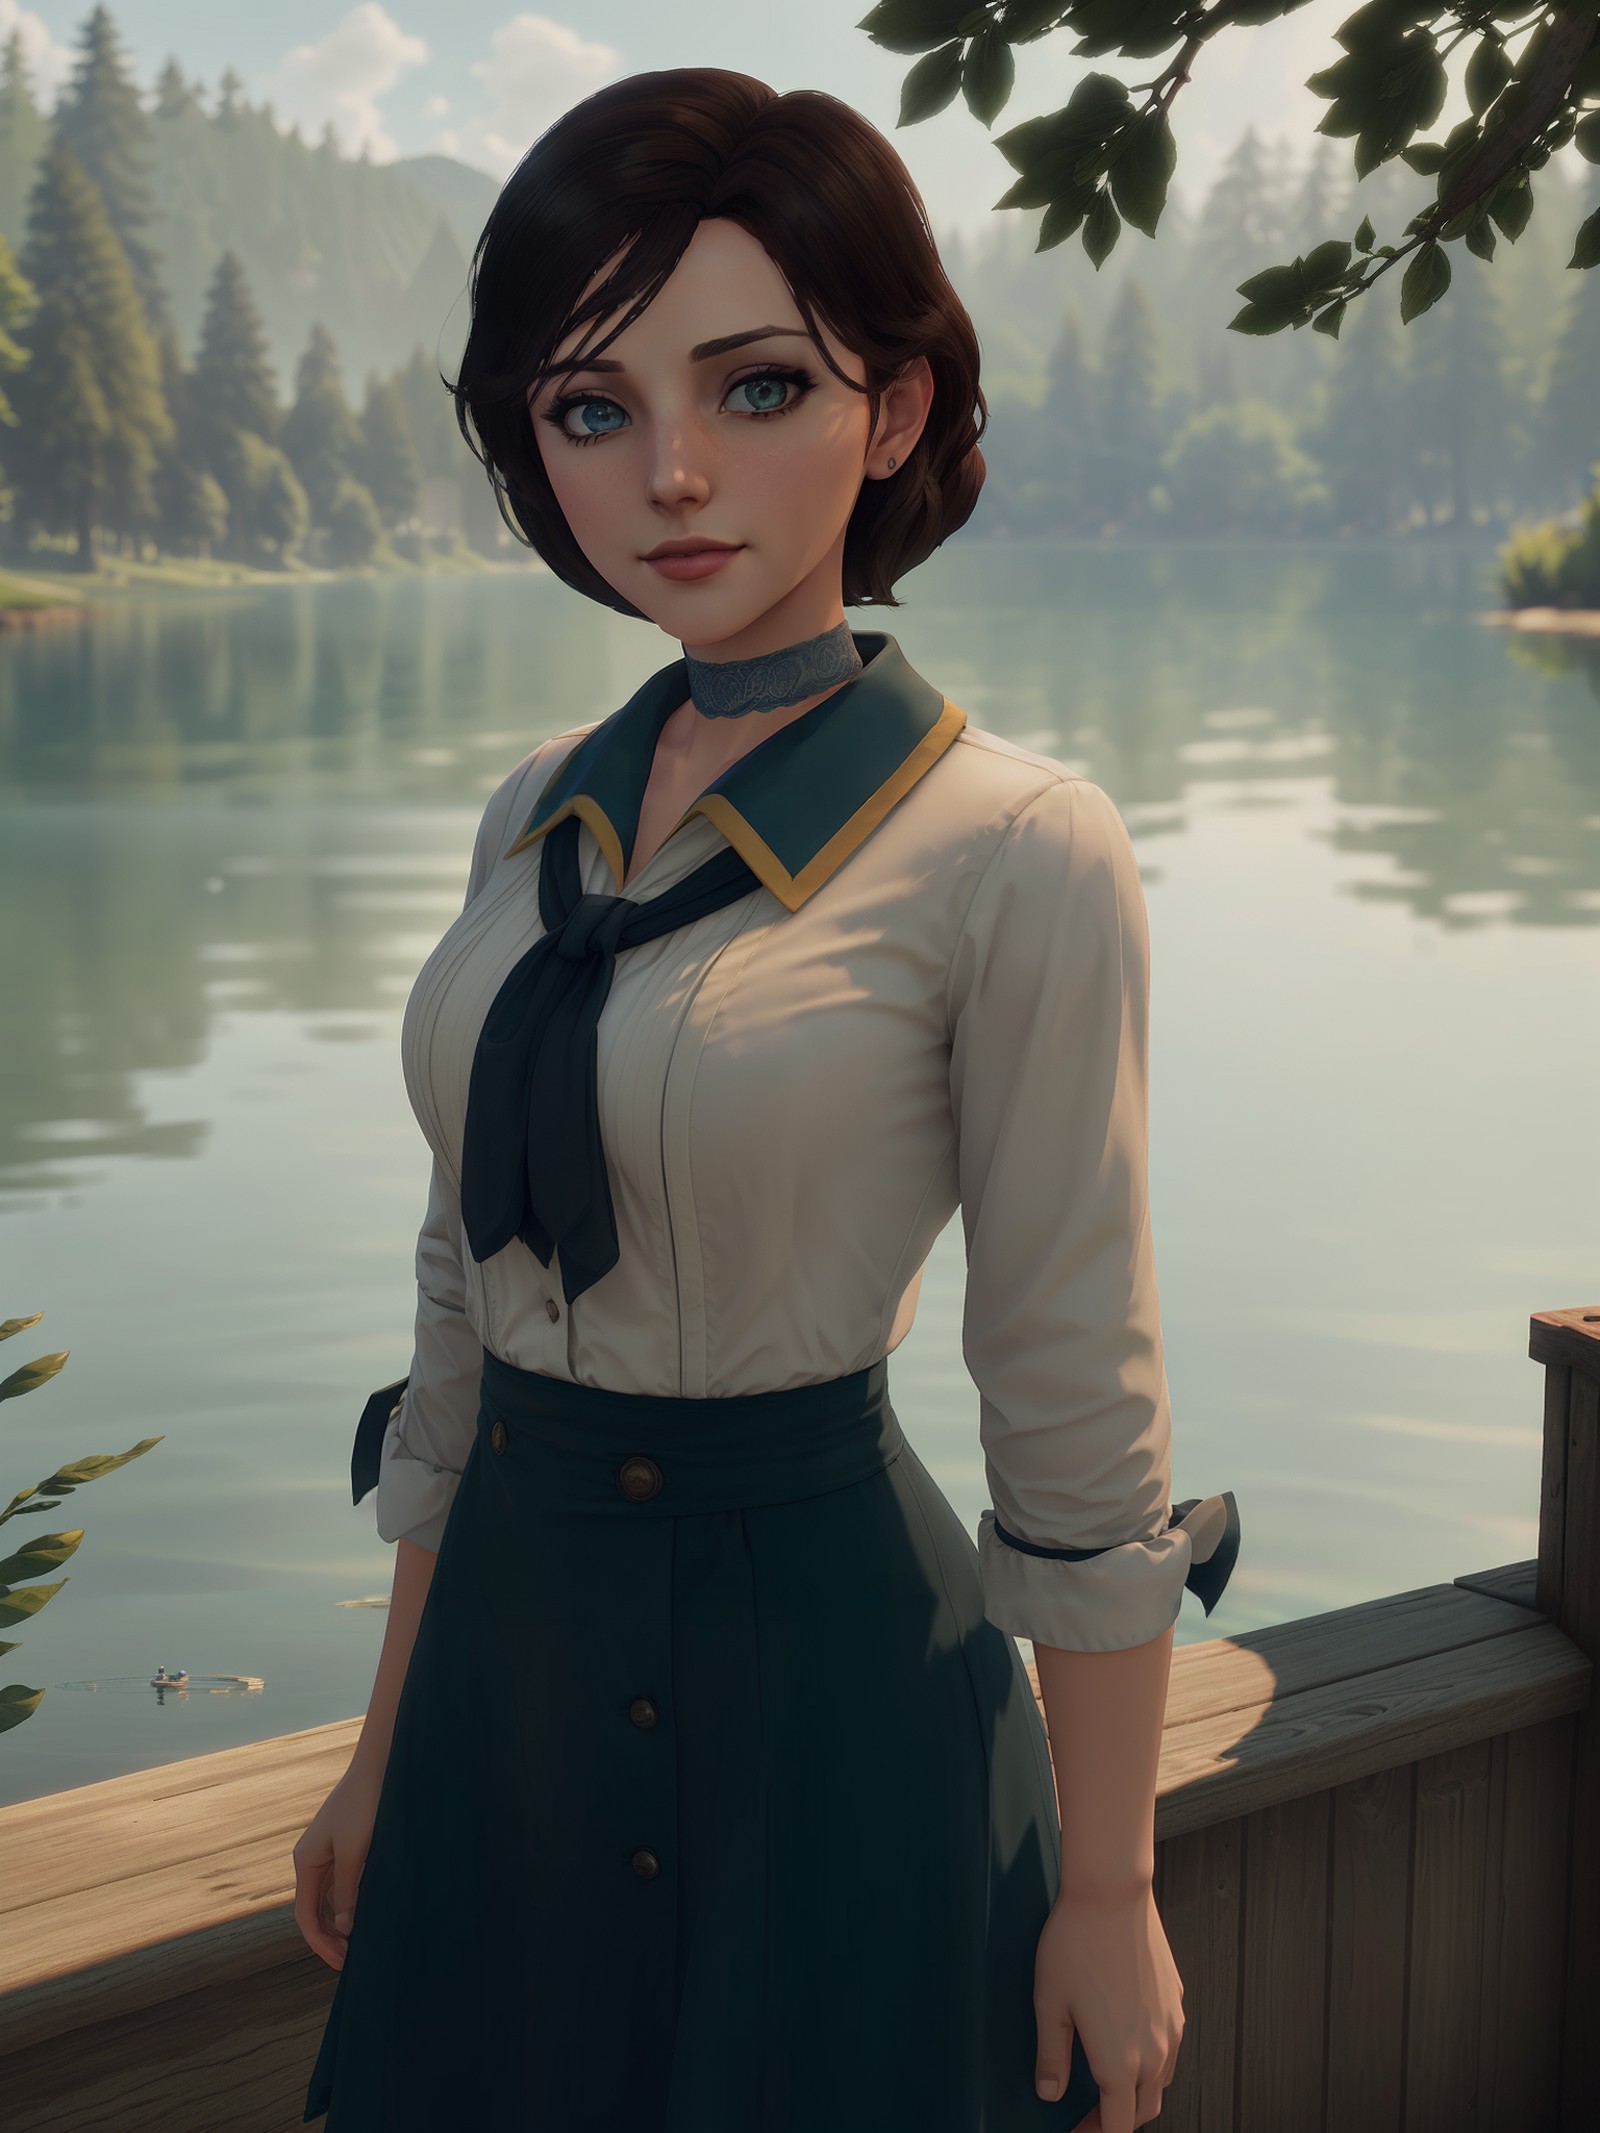 vibrant, bioshockelizabeth standing next to a lake, beautidul lake with trees, cute face, sunny weather, dramatic lighting...